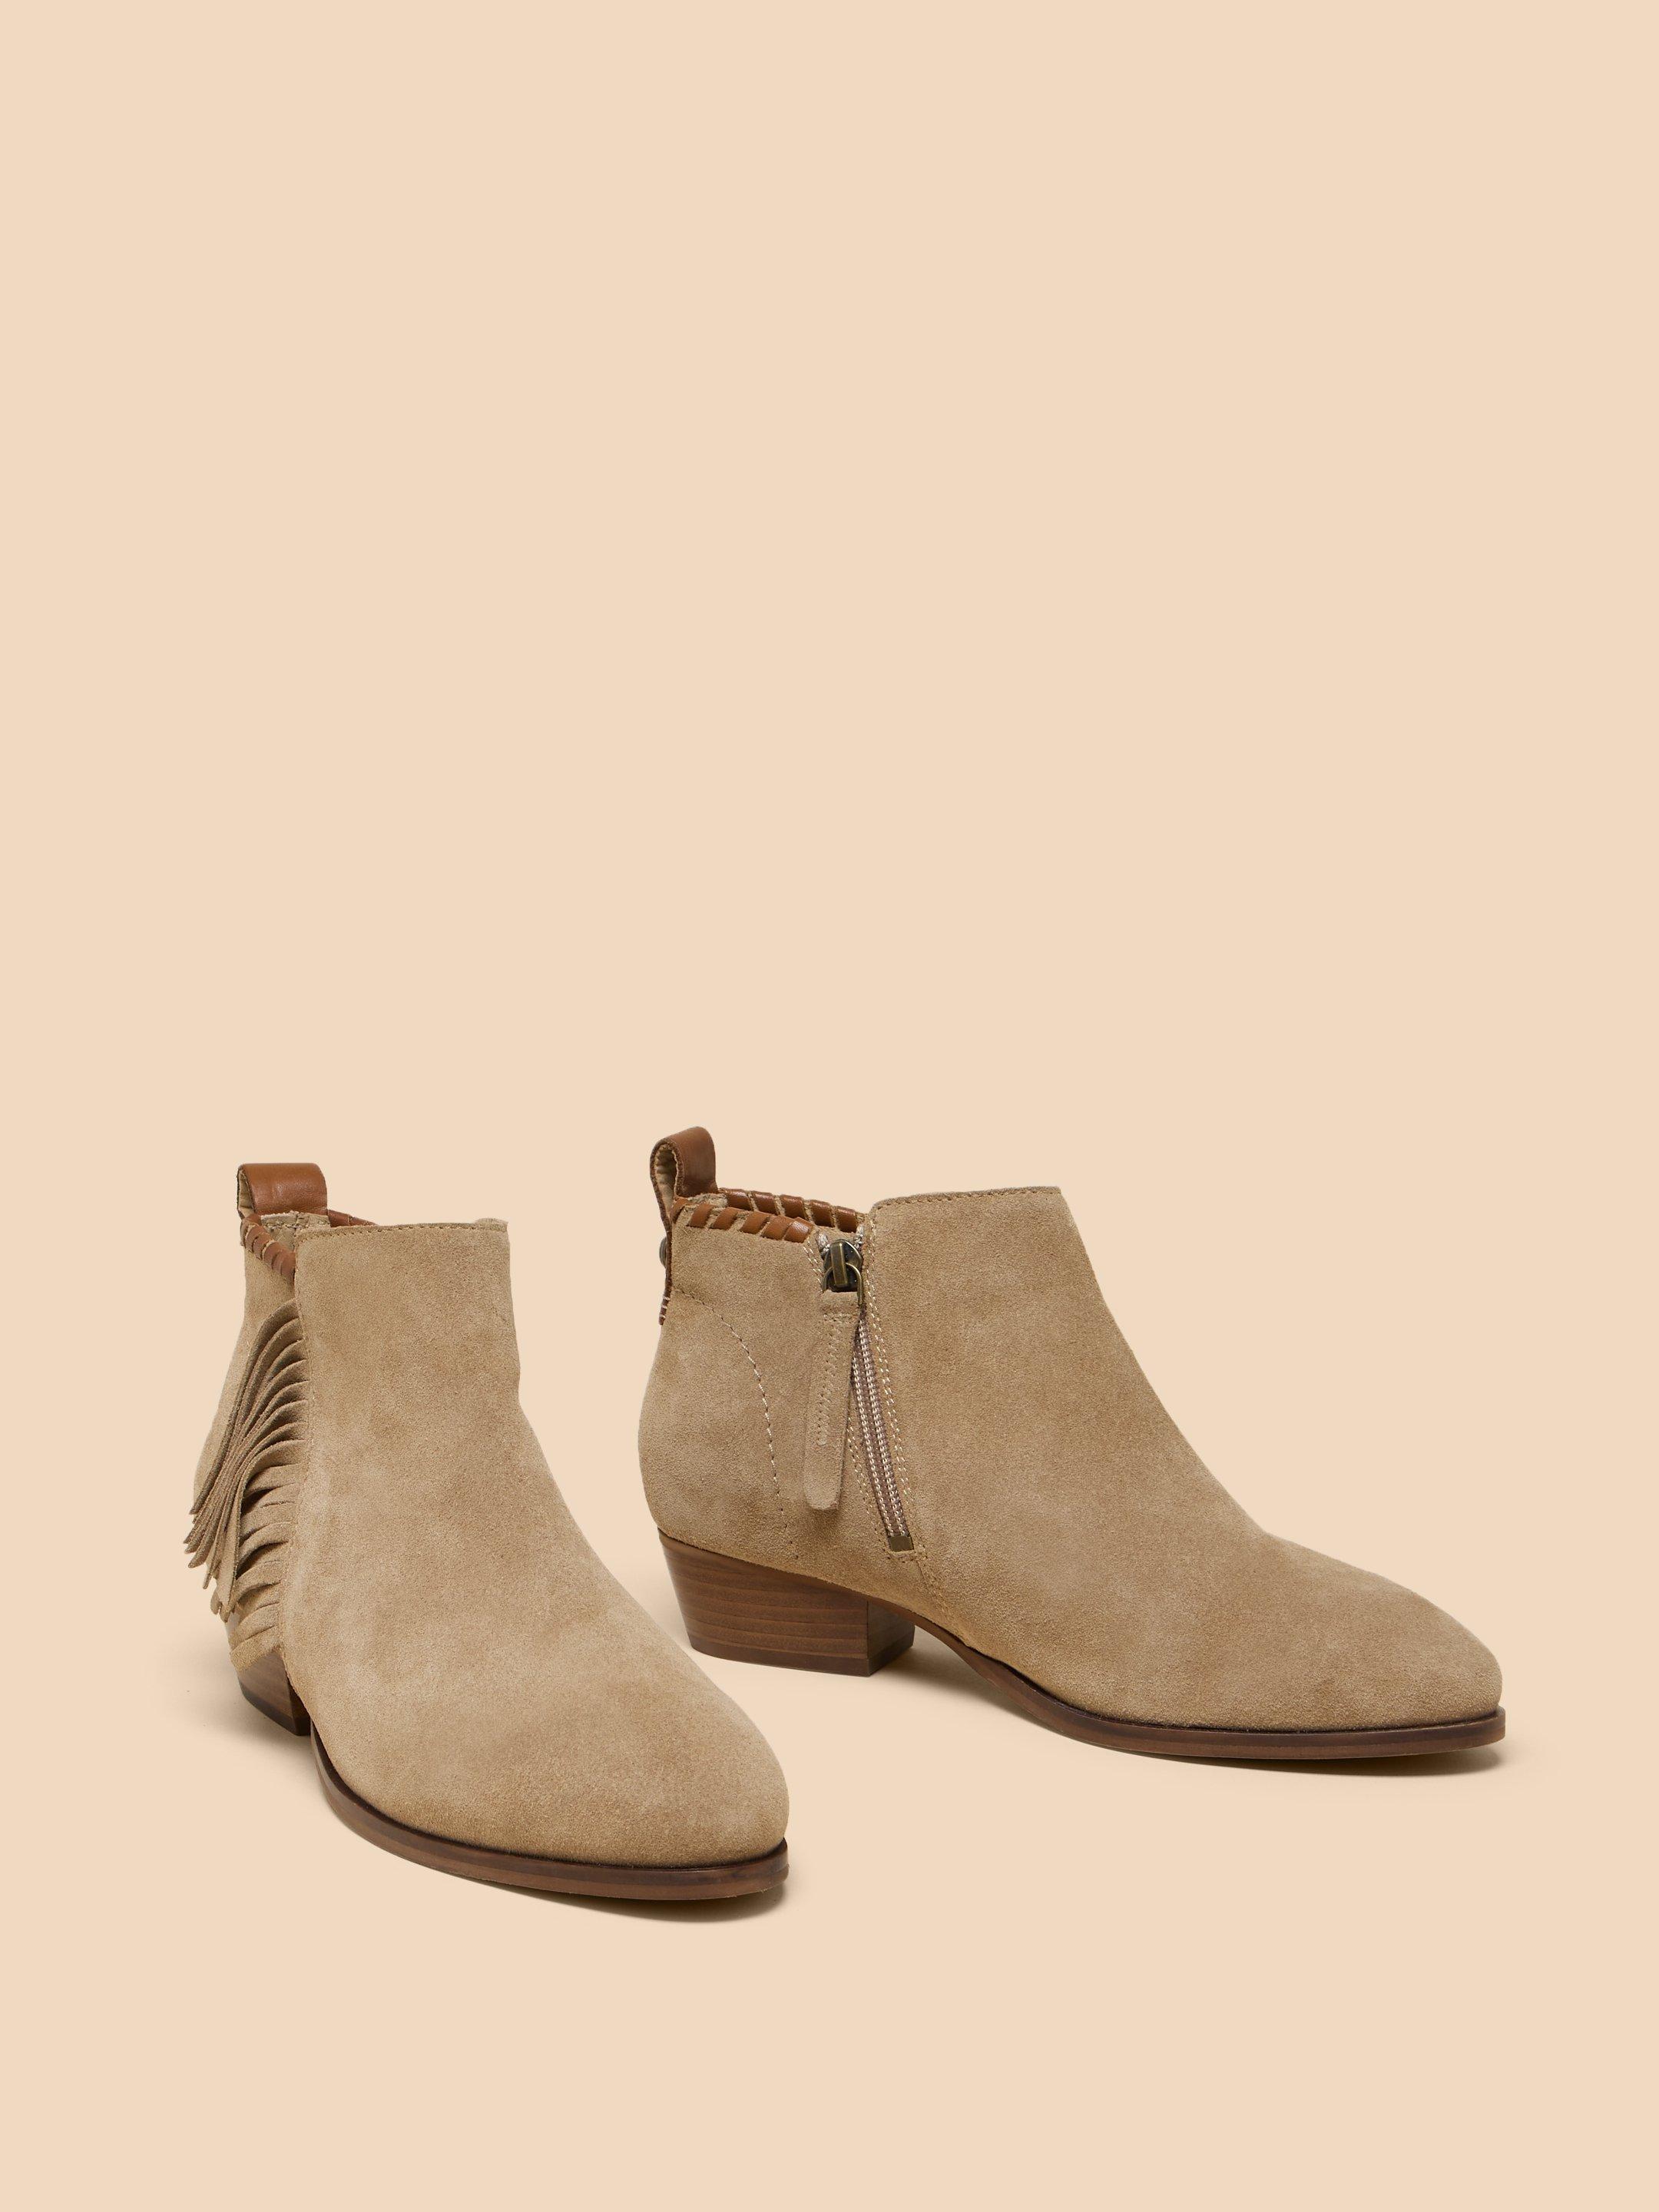 Acacia Suede Fringe Ankle Boot